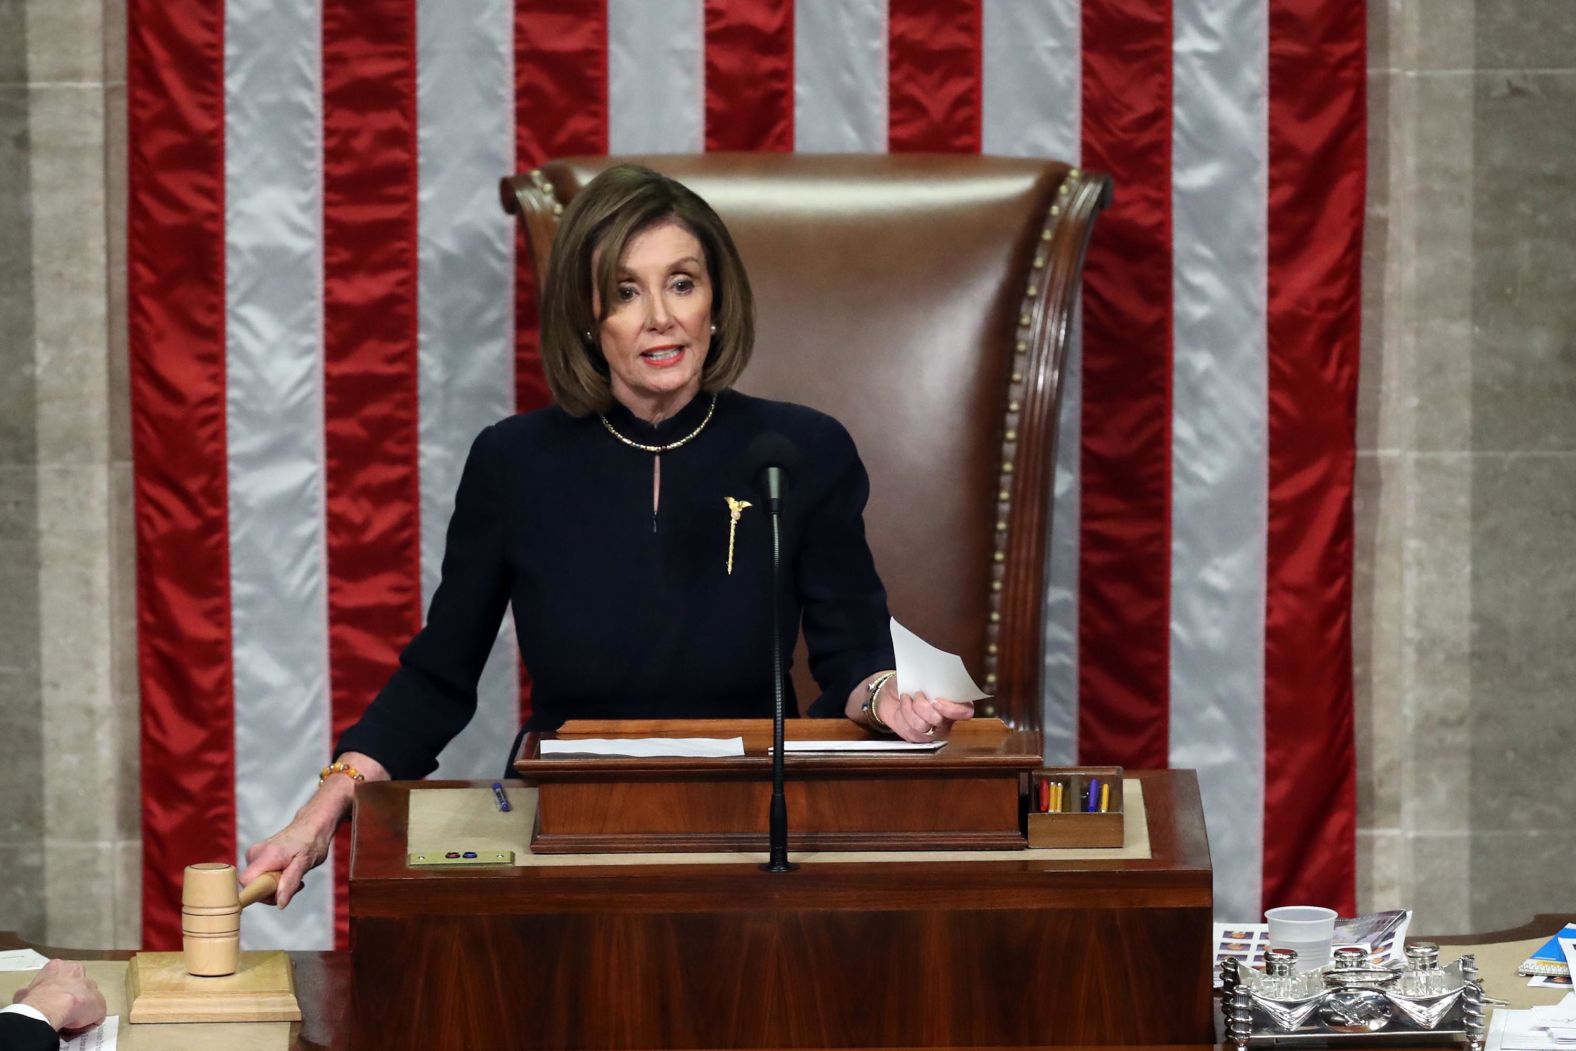 After a House vote on December 18, Pelosi announces that the articles of impeachment have passed.